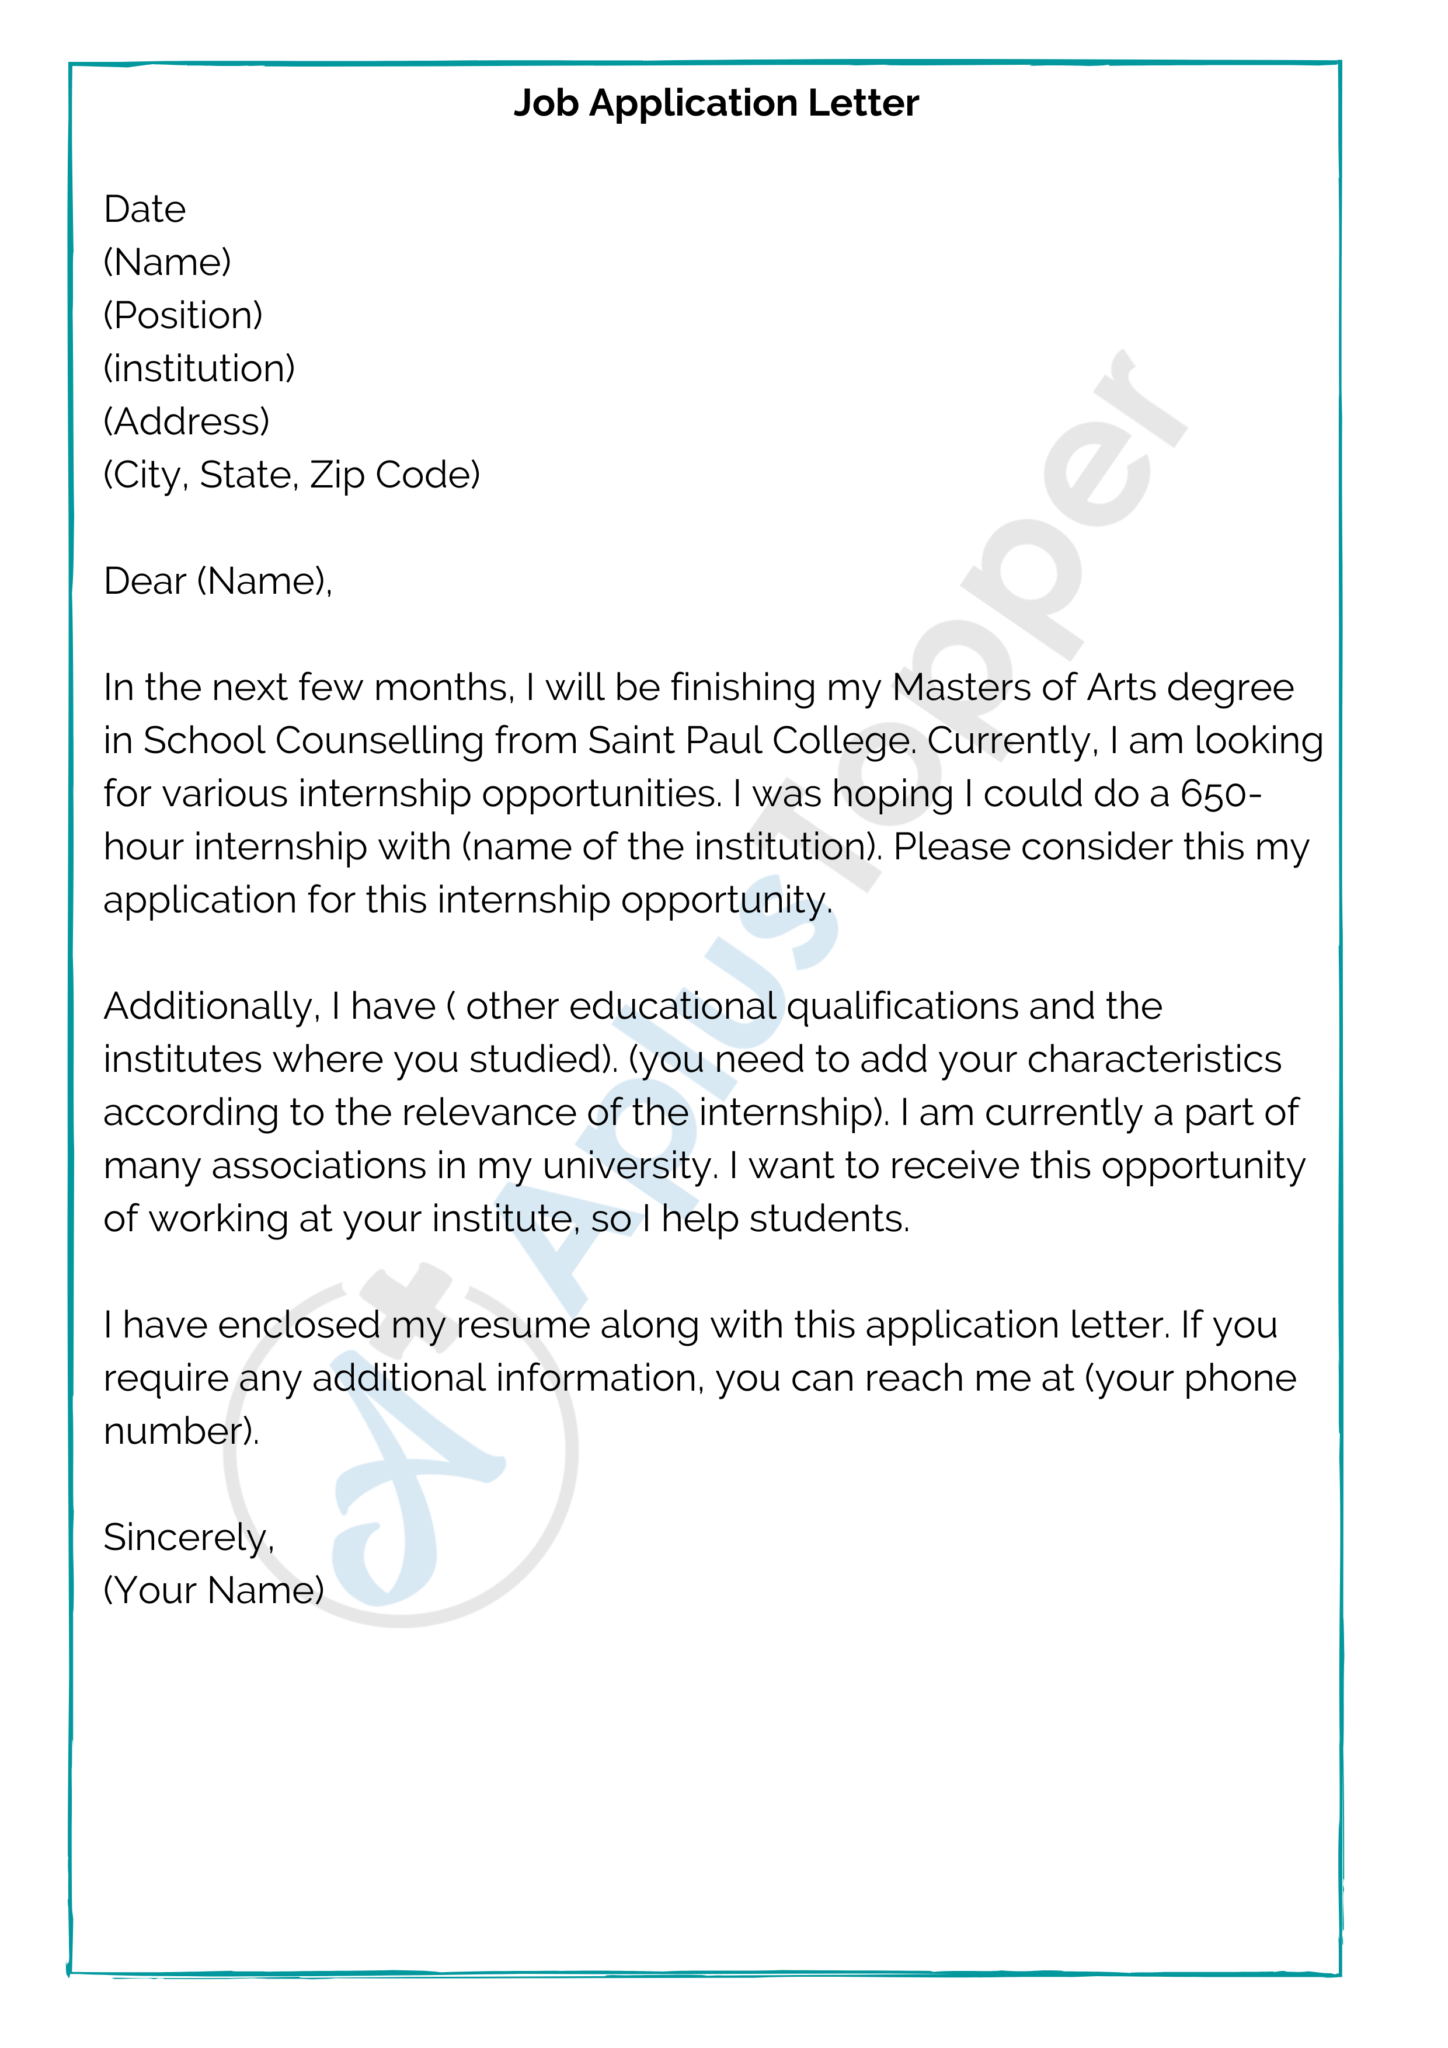 how does an application letter look